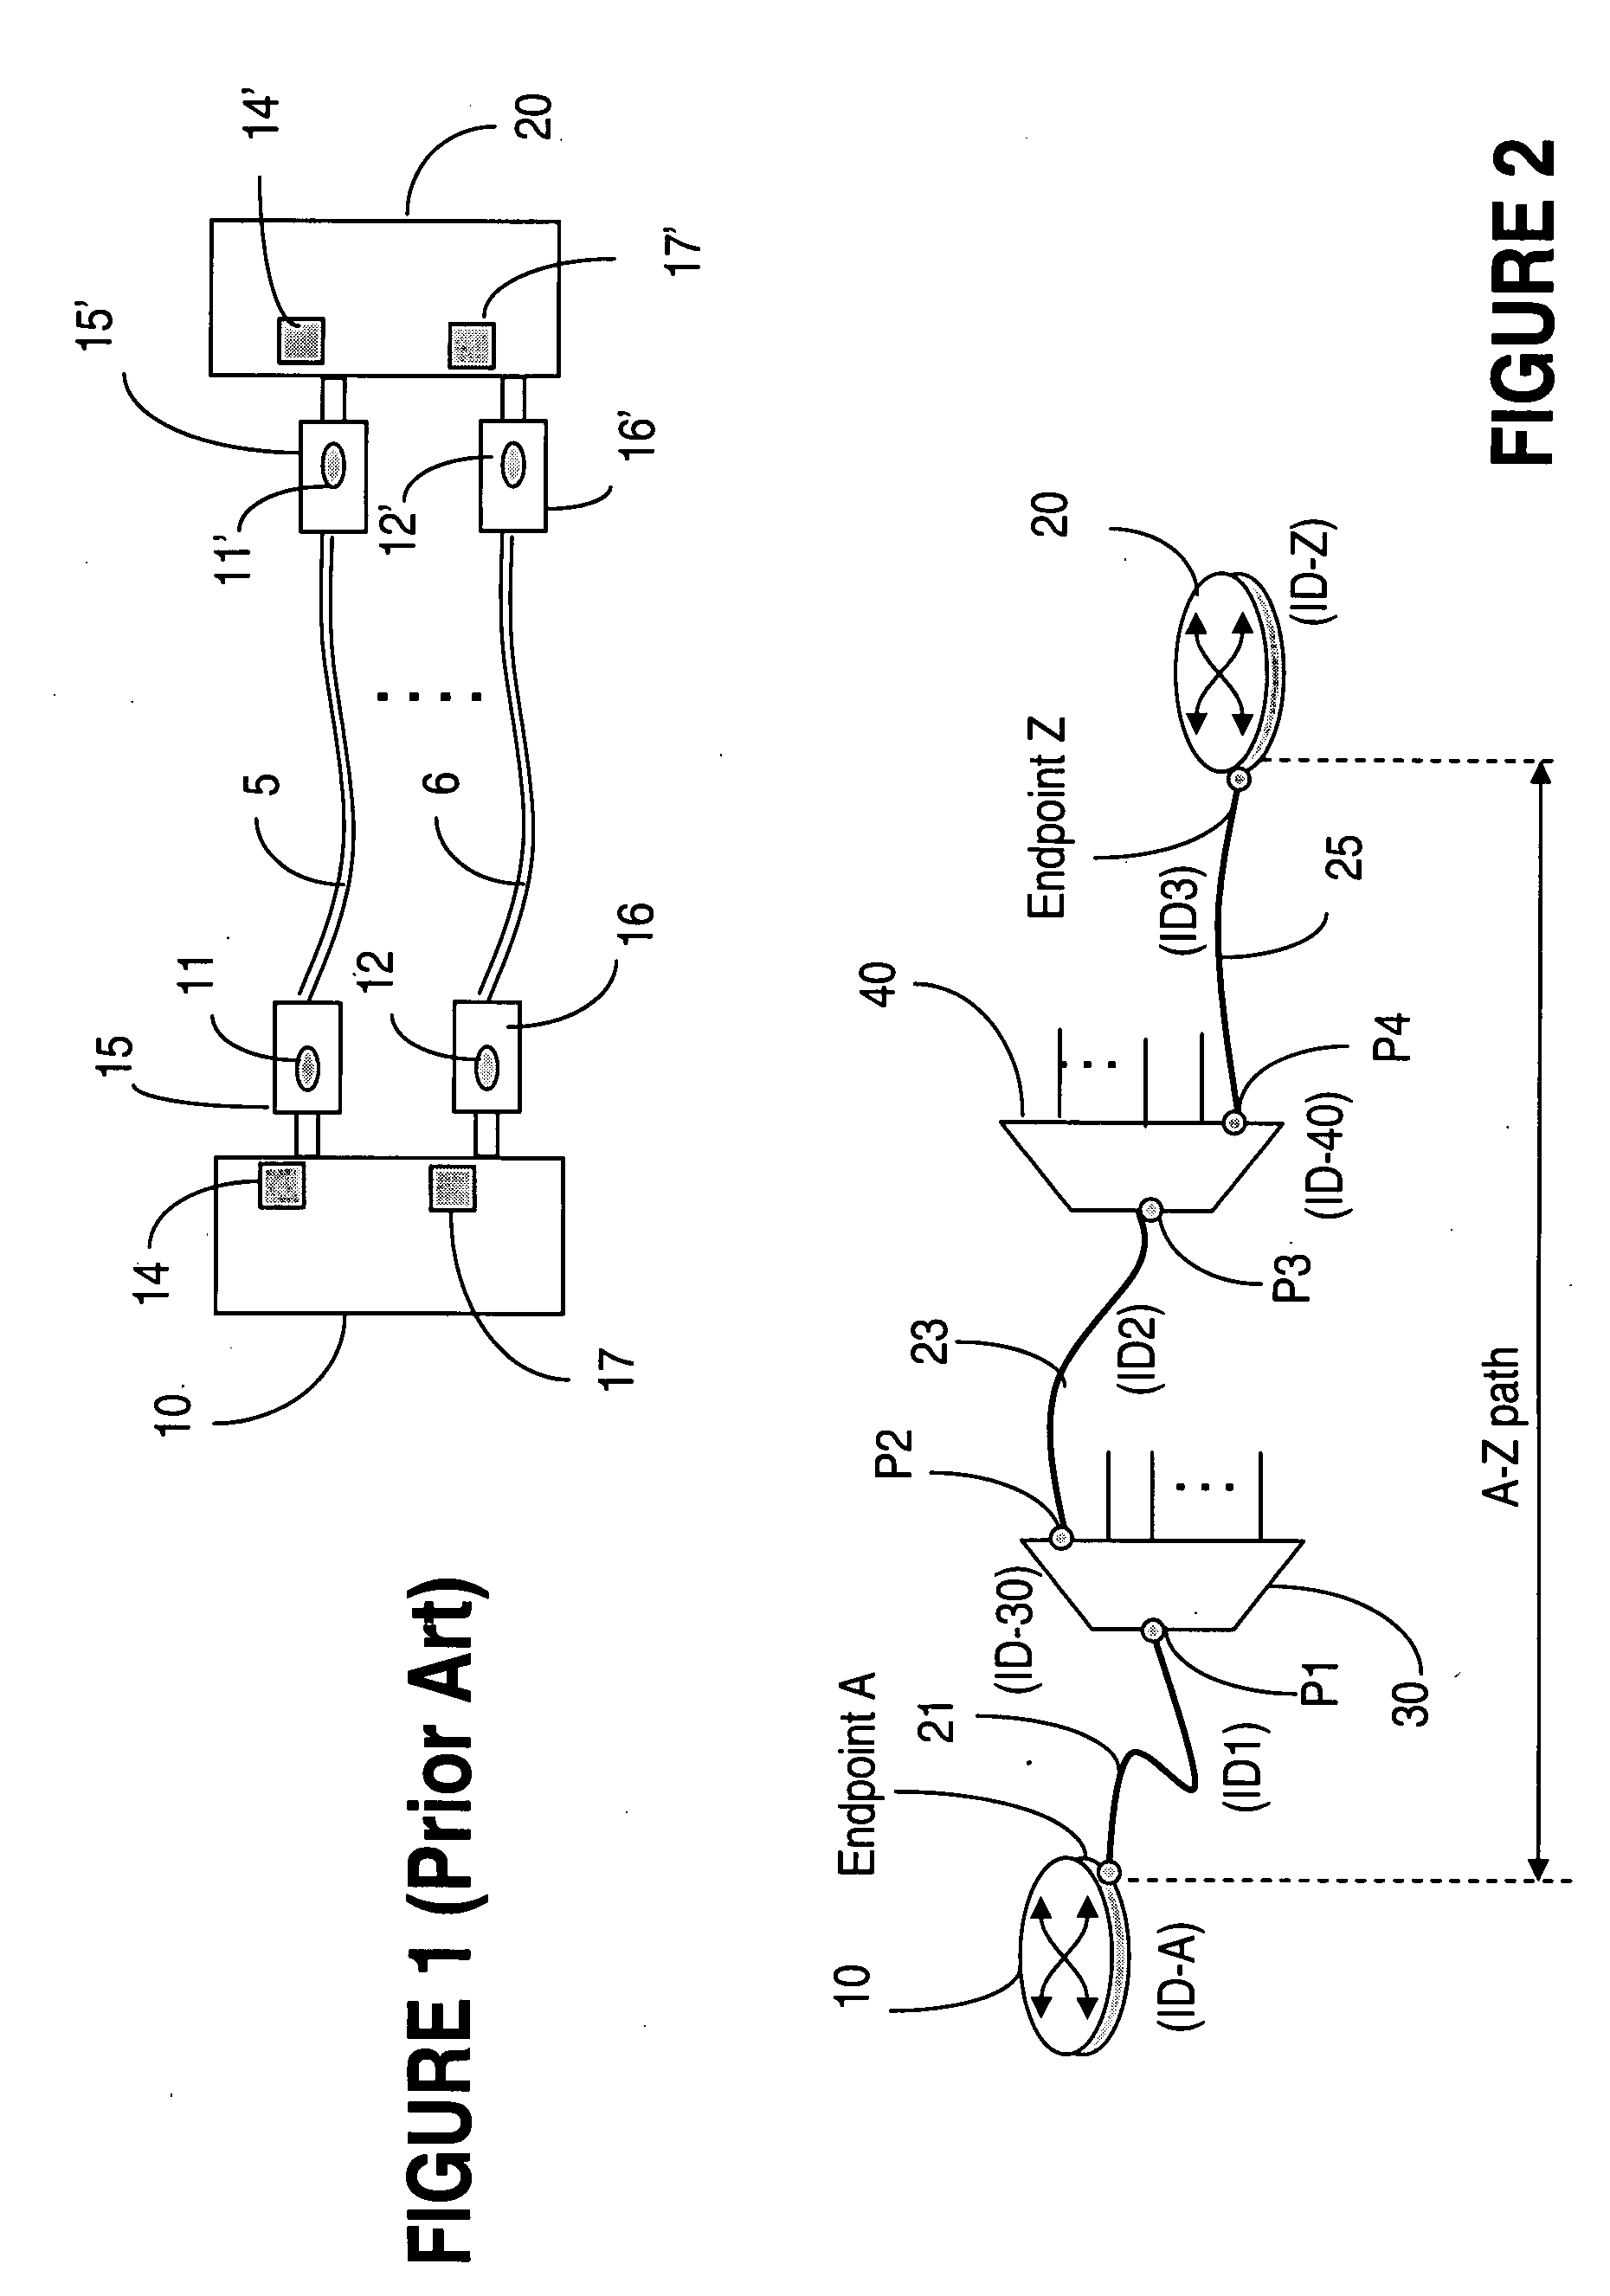 System and method for tracing cable interconnections between multiple systems